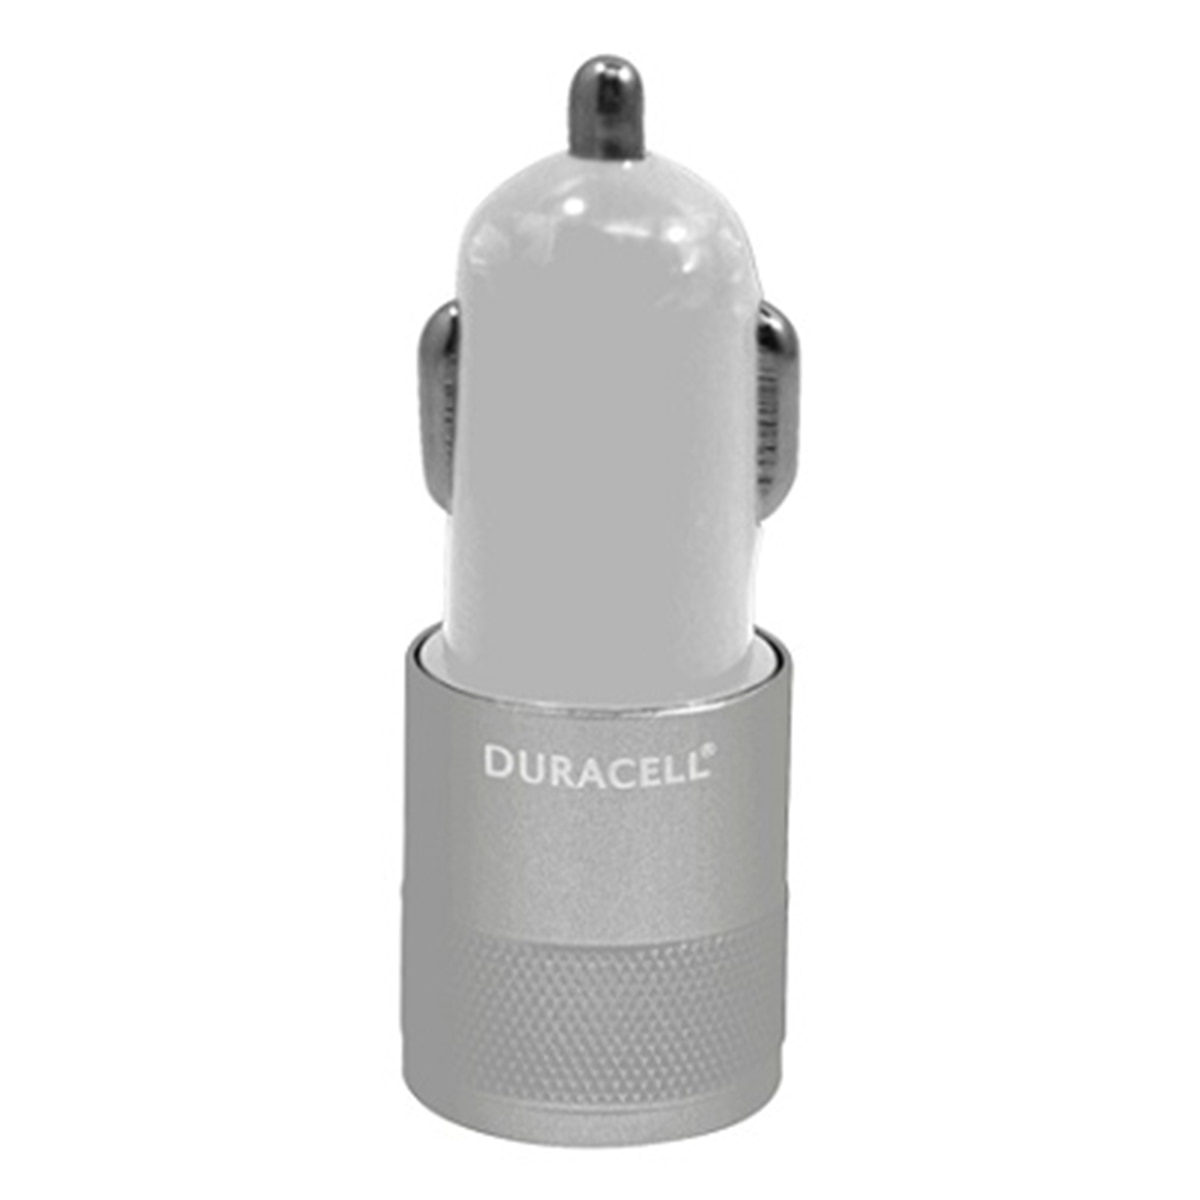 Dual USB Car Charger 2.1Amp Duracell